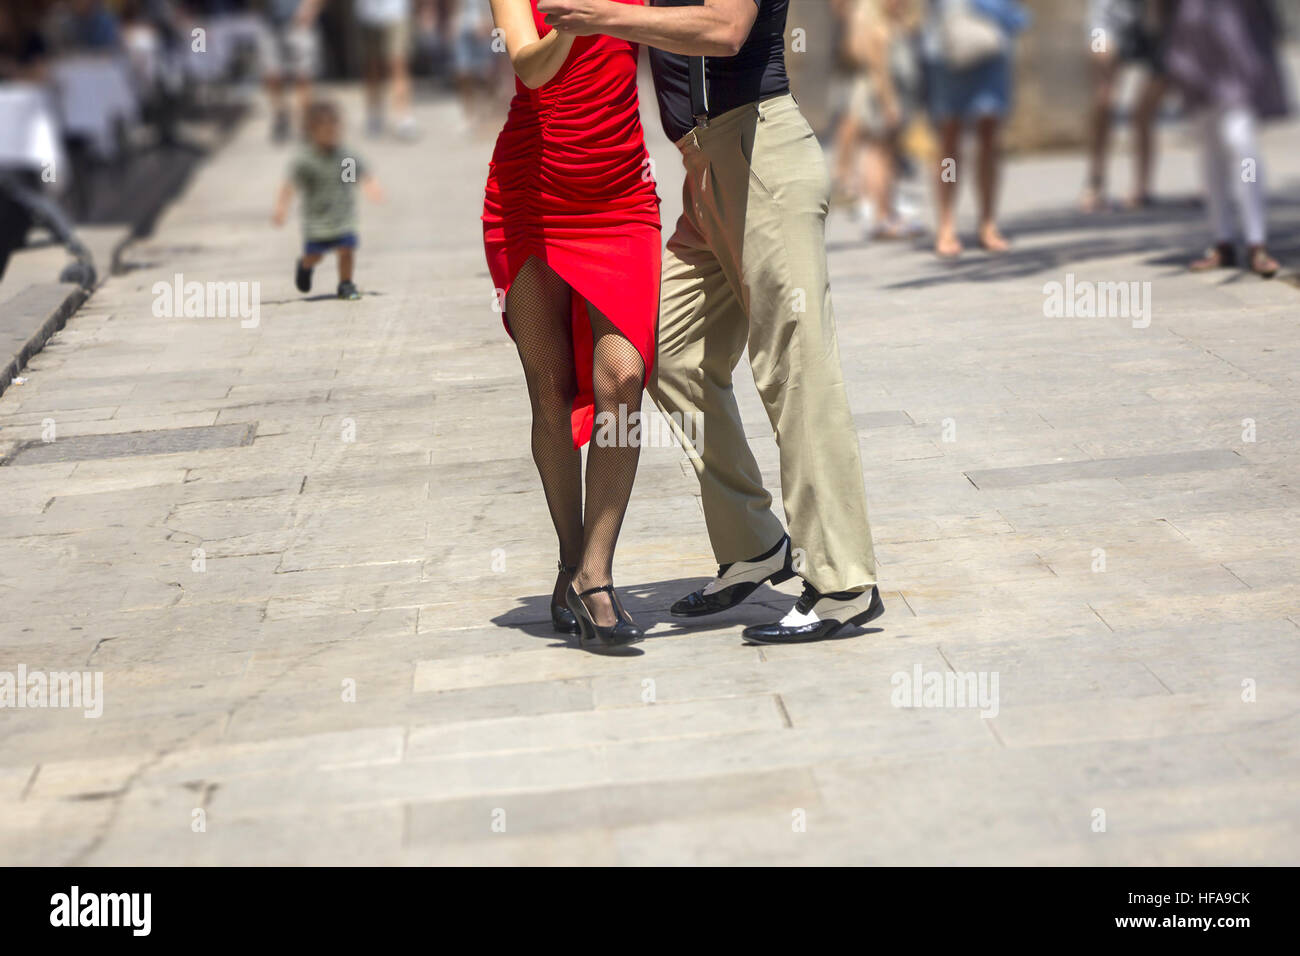 Street dancers performing tango in the street among the people Stock Photo